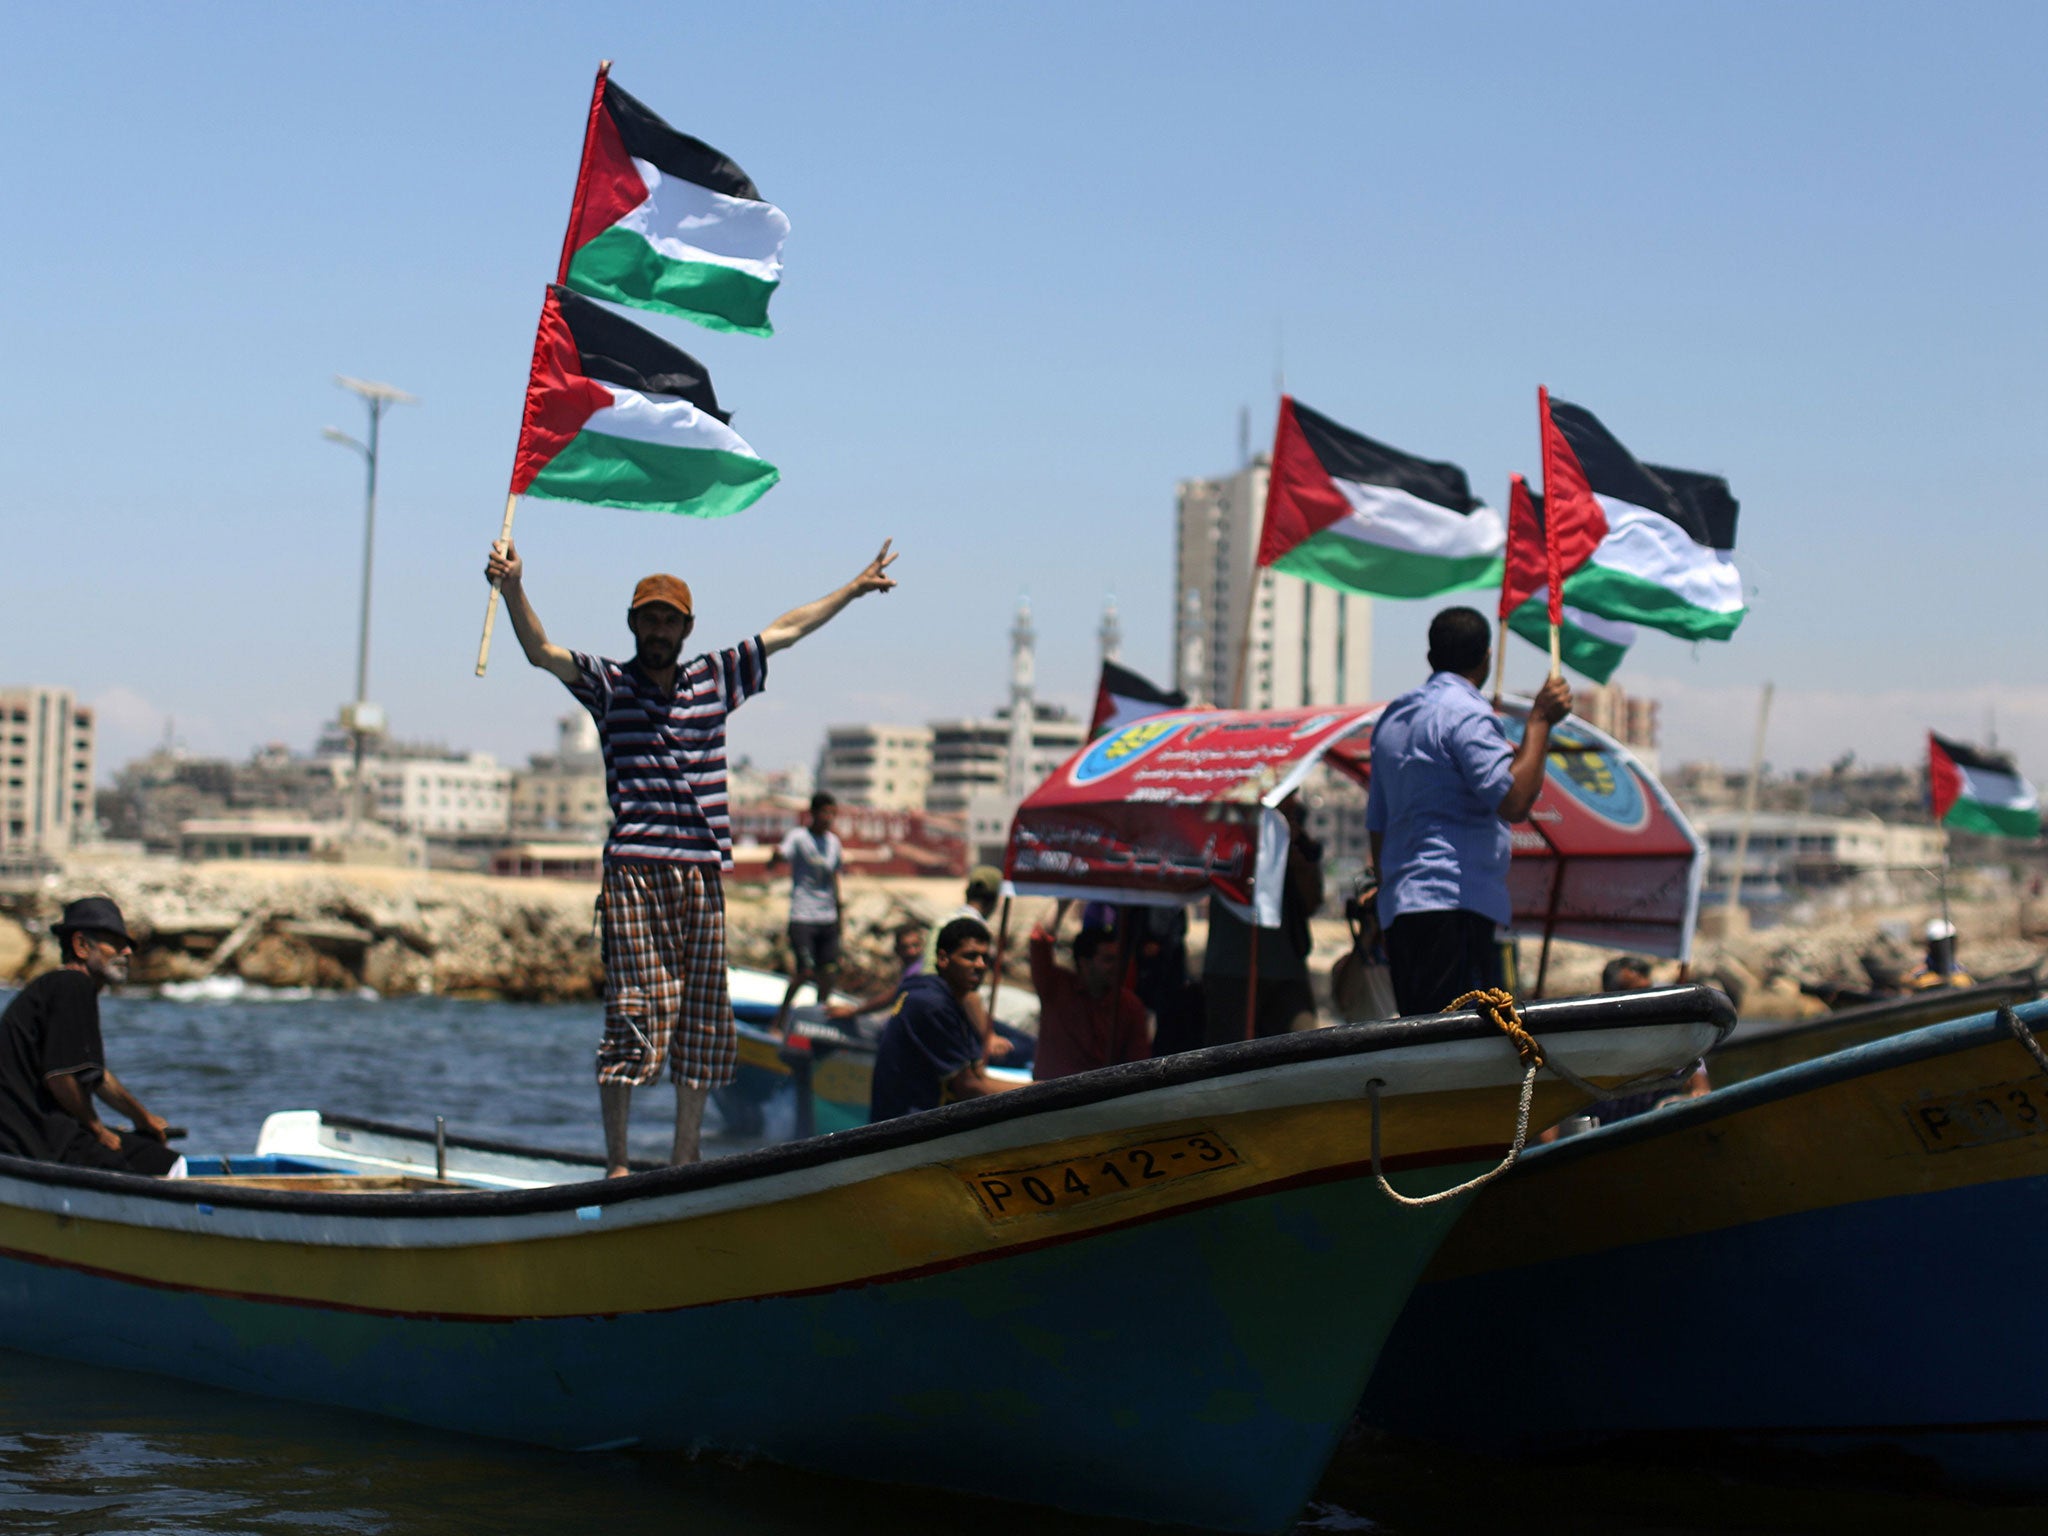 Palestinians wave their national flag as they ride boats during a rally in support of activists aboard a Pro-Gaza flotilla made up of four boats aimed at defying Israel's blockade of Gaza, at the seaport of Gaza City